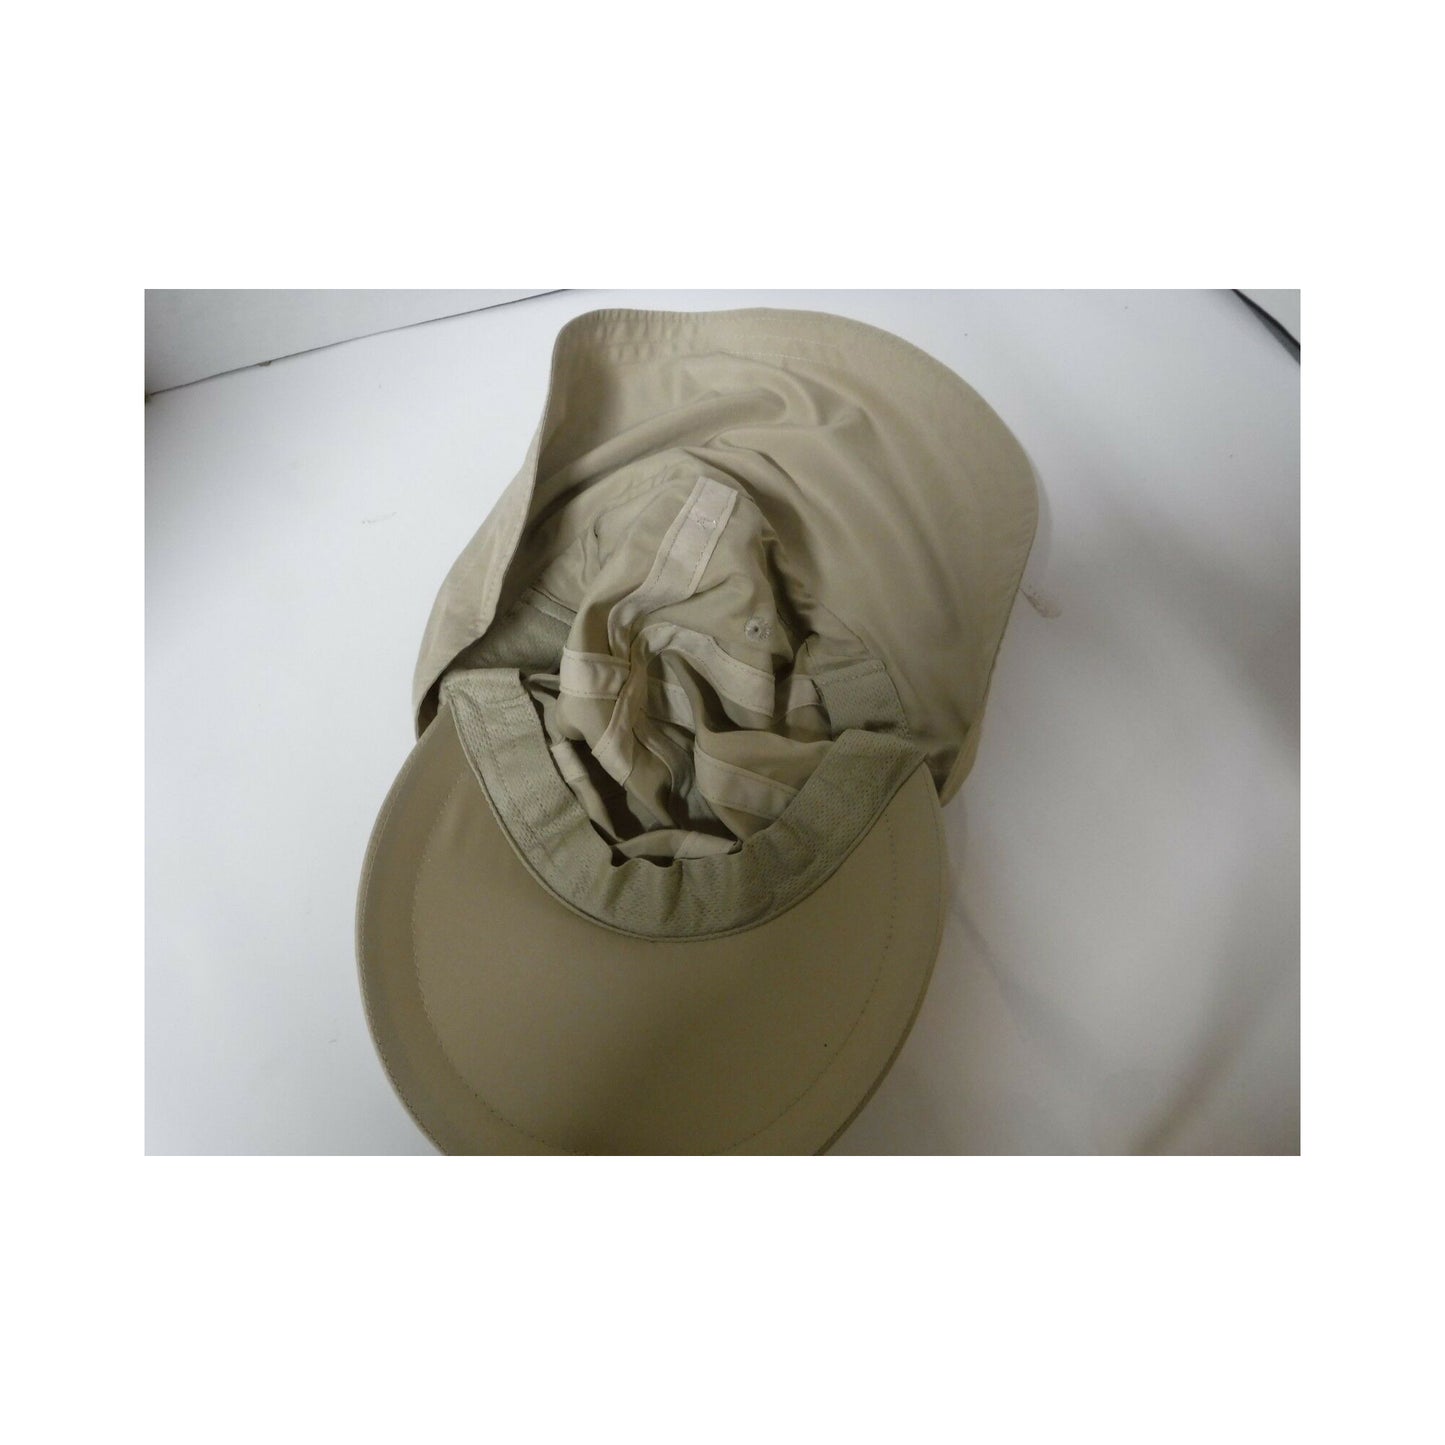 New Authentic Outdoor Guide Cap Khaki with Drawstring Sunblock